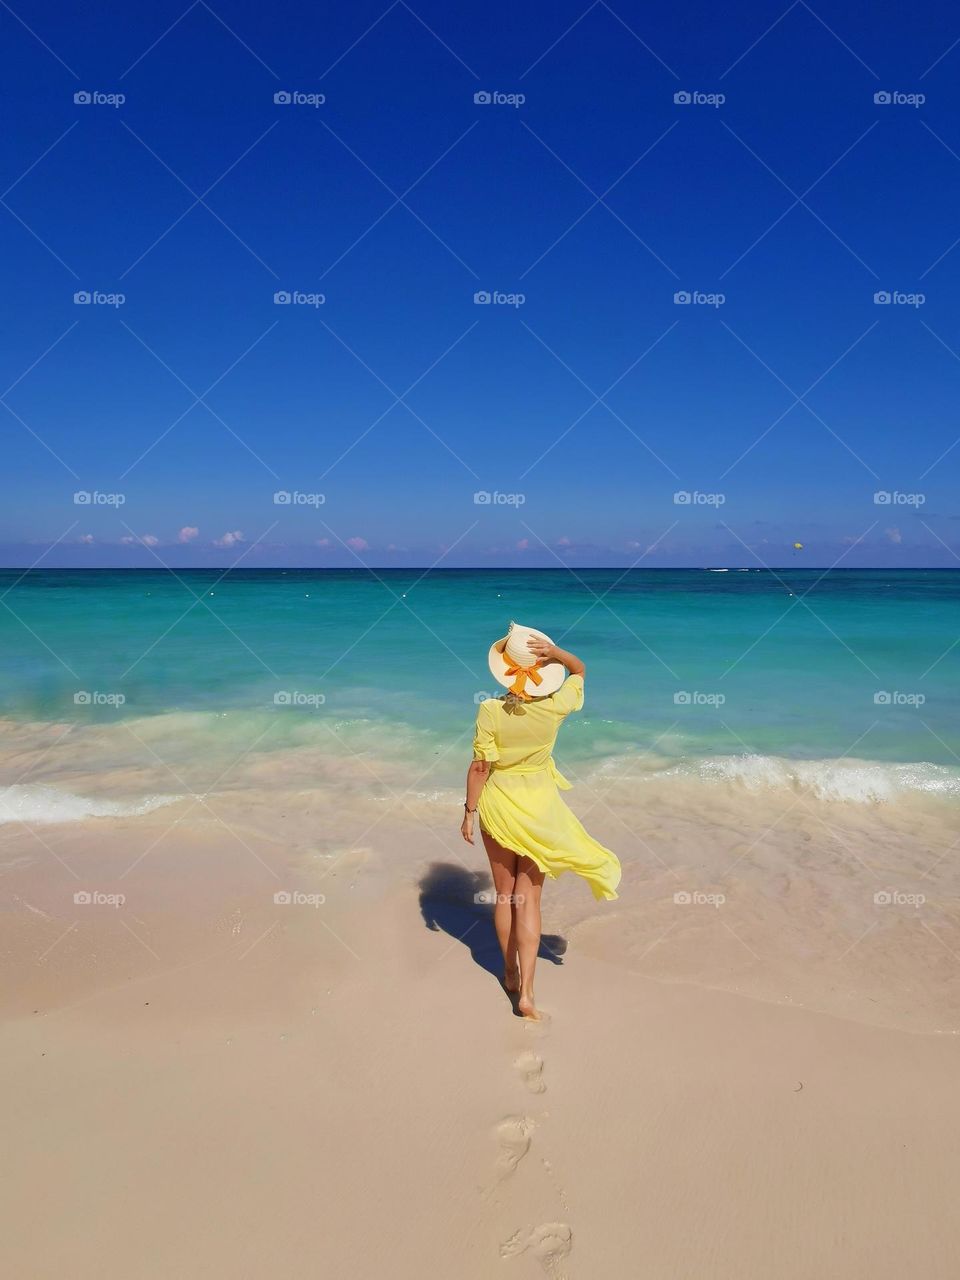 Amazing holiday time in the Dominican Republic. Bavaro beach. Woman in yellow dress an nice hat looks at the sea. Travel photo. Summer time. Sunny weather. Blue sky, blue sea, sun, sand and woman. Time to relax and enjoy sunshine.